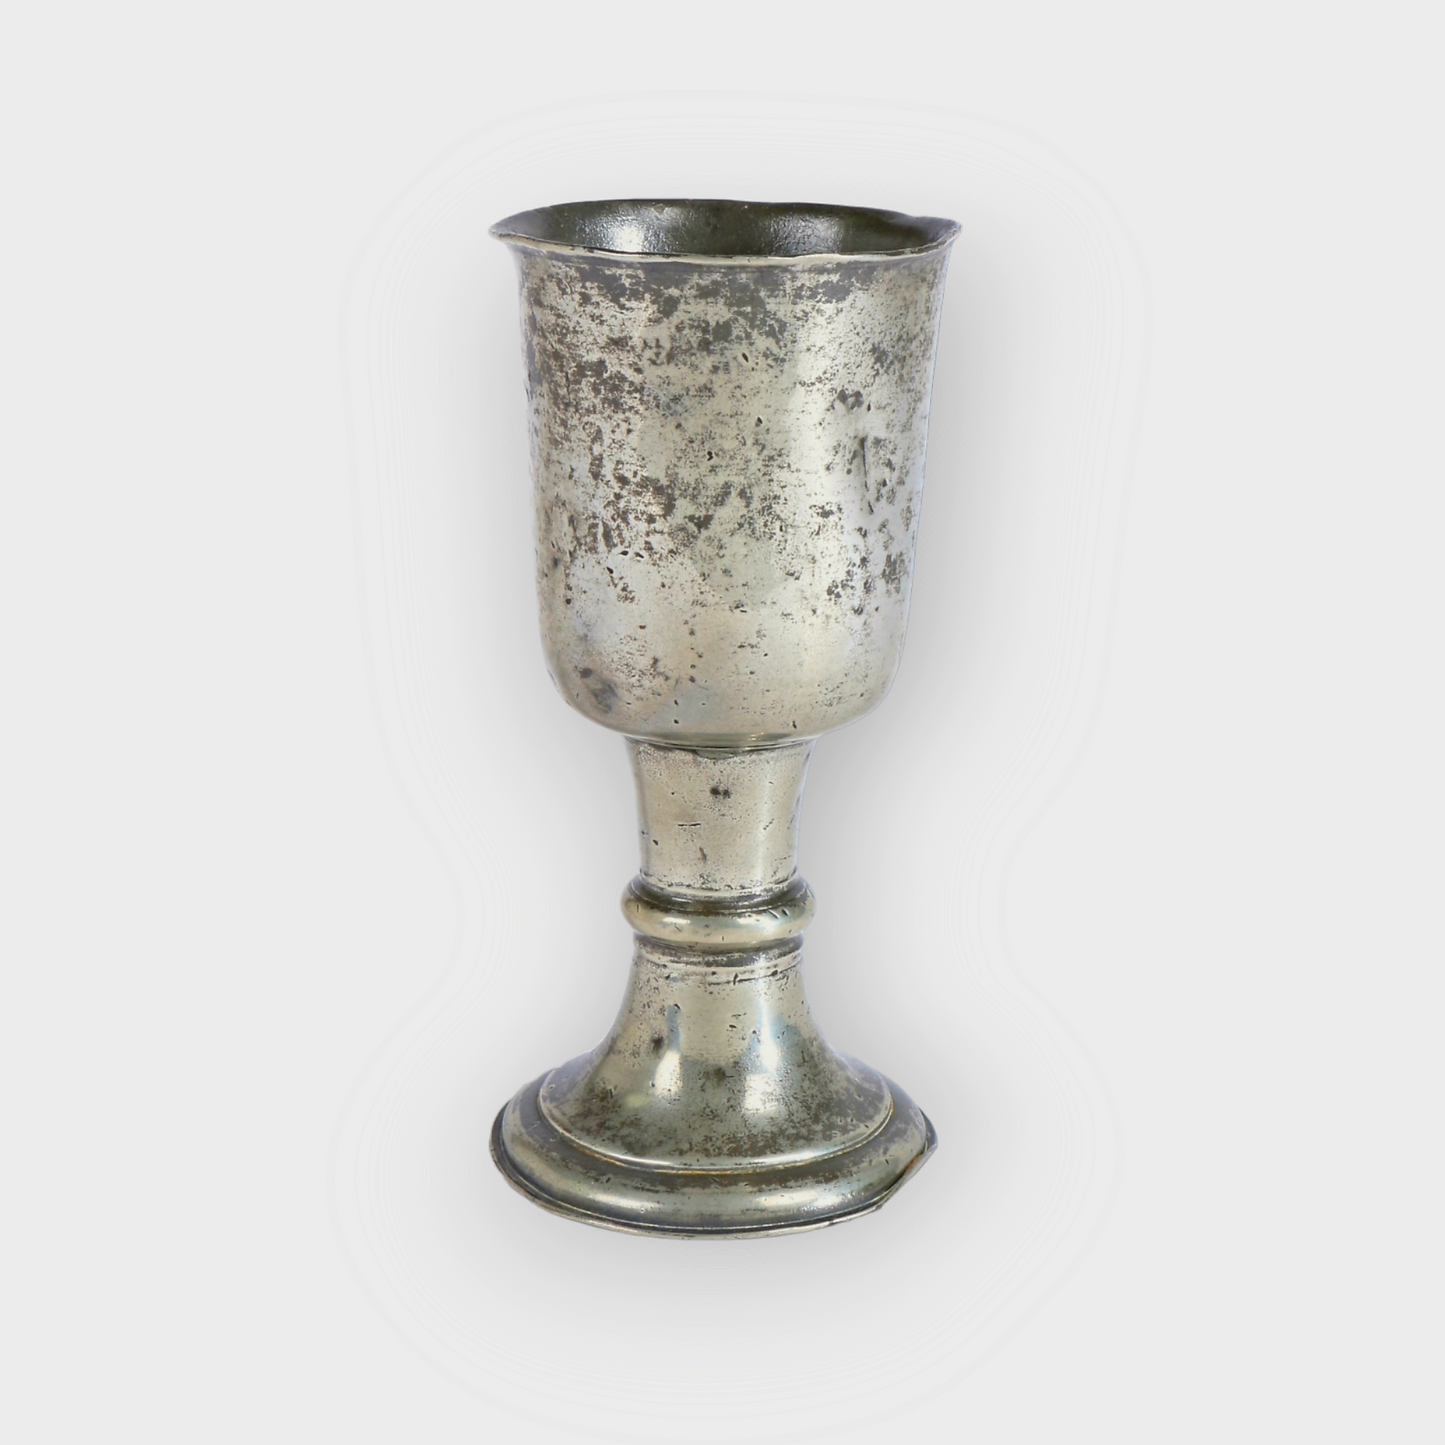 Early 18thC, George II Period, English Antique Pewter Communion Cup, circa 1730-40.